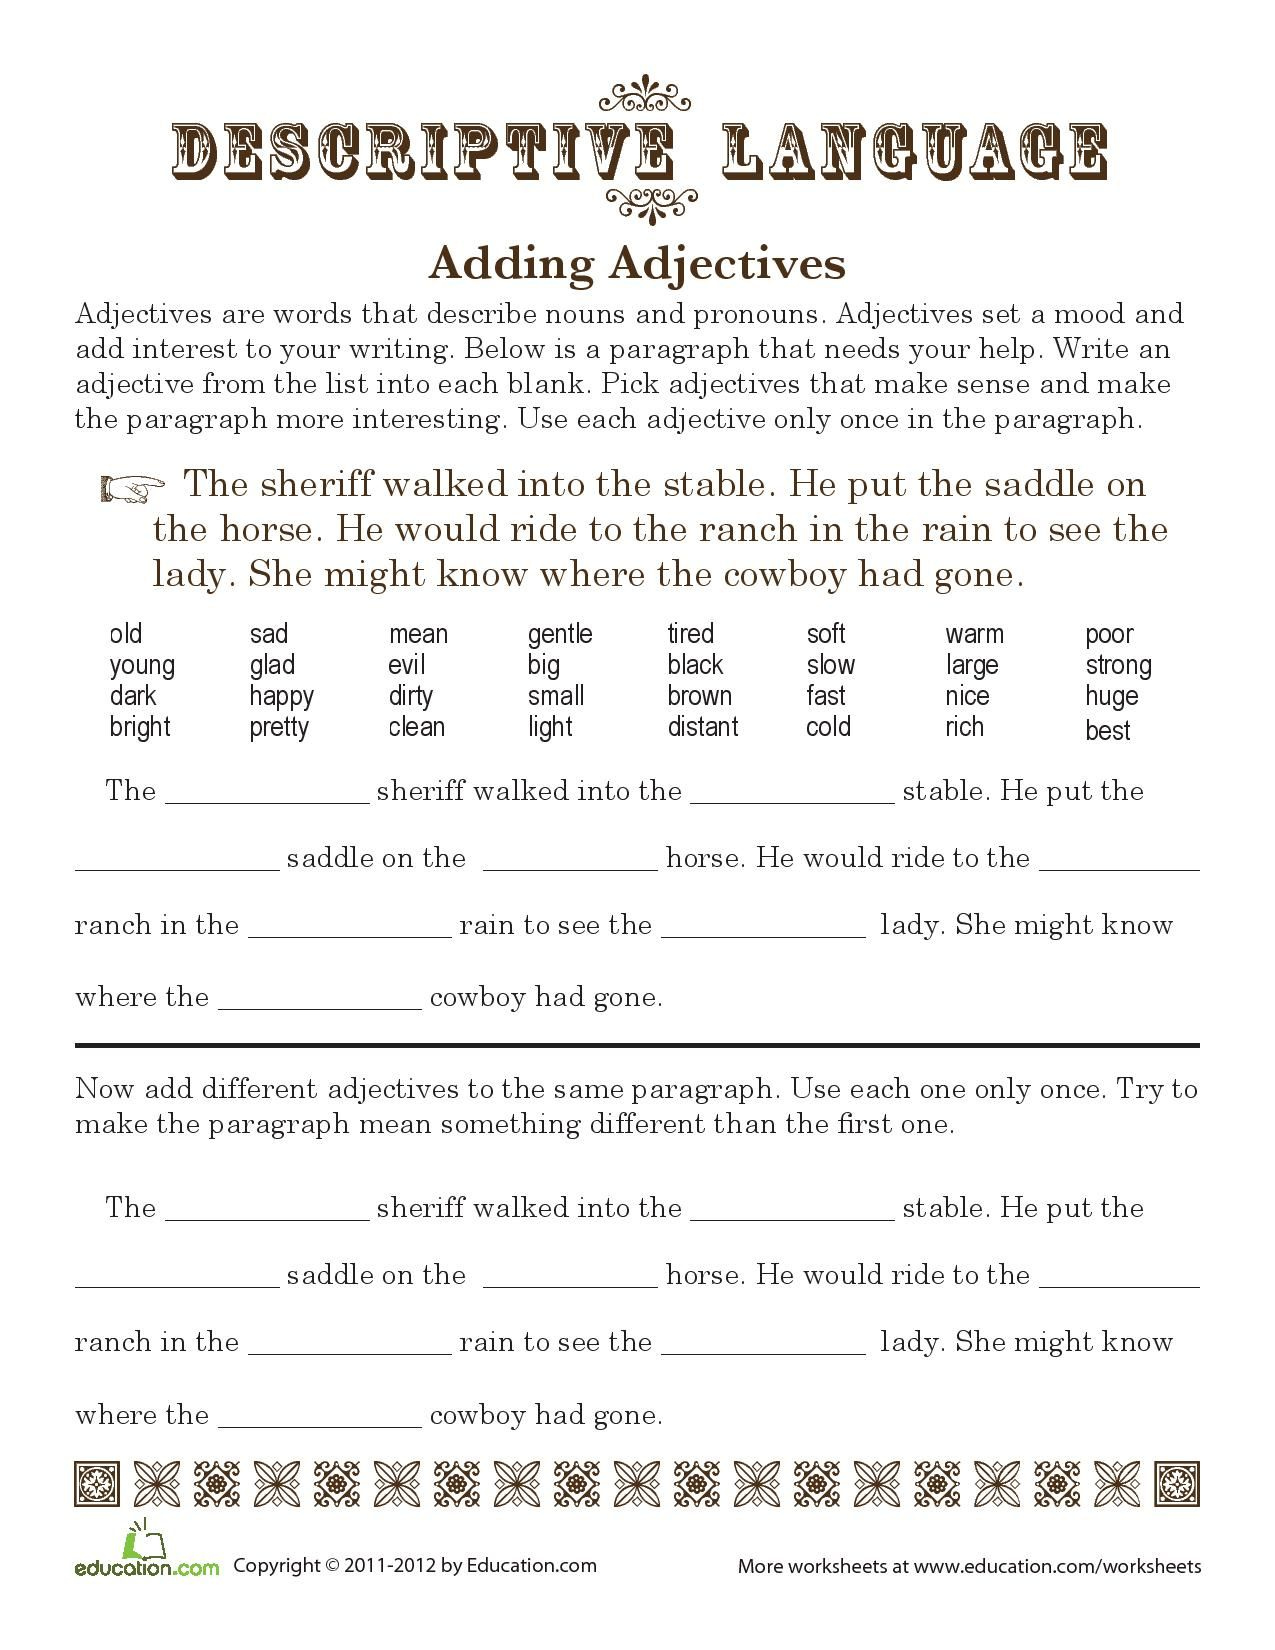 Time To Saddle Up Some Adjectives Descriptive Language Adds Interest 